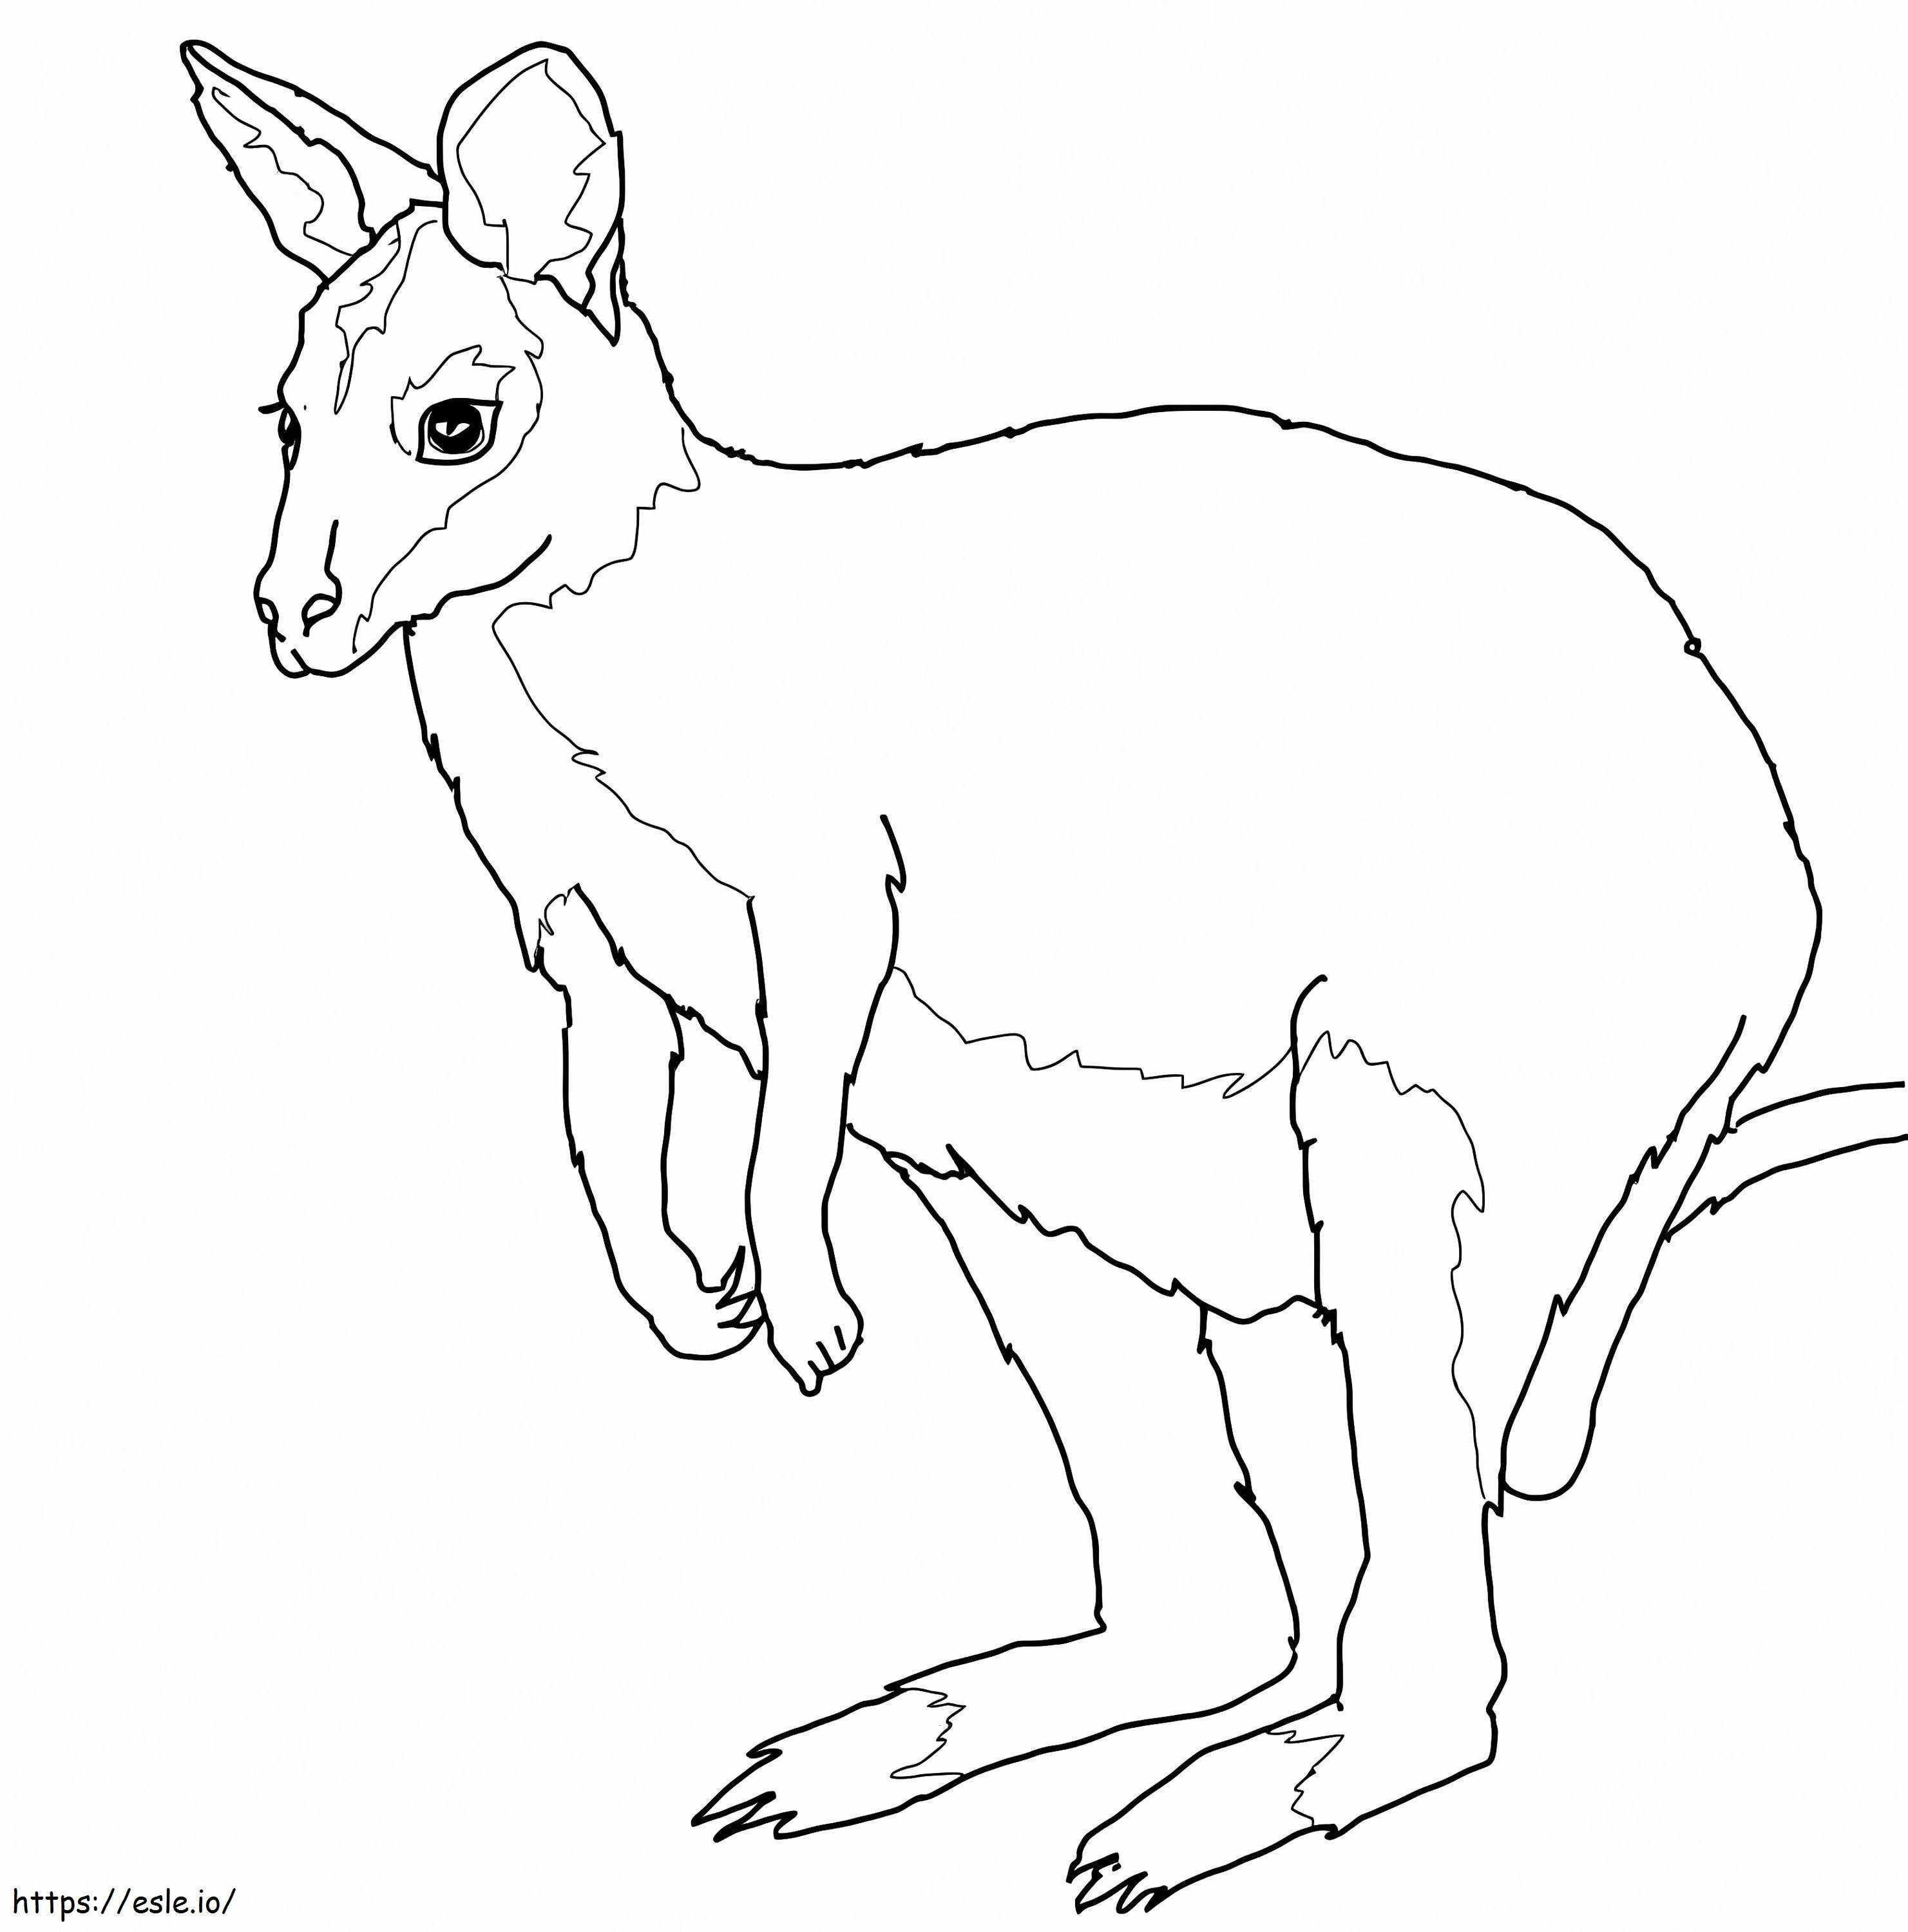 Normal Wallaby coloring page